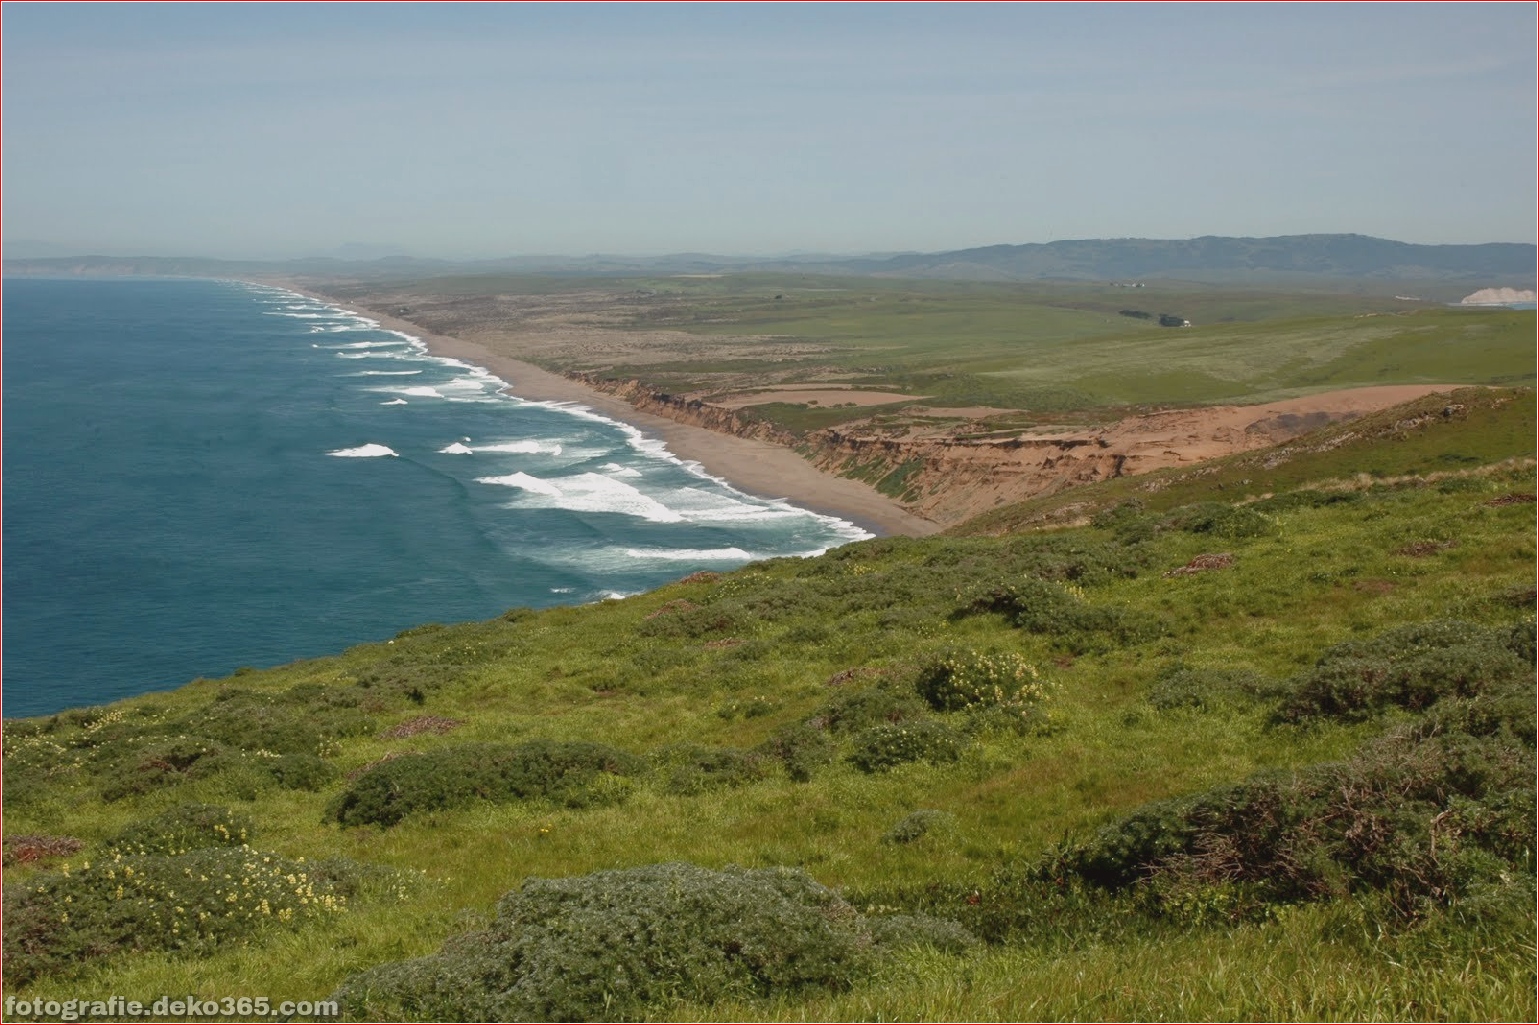 A view of the national seashore and peninsula